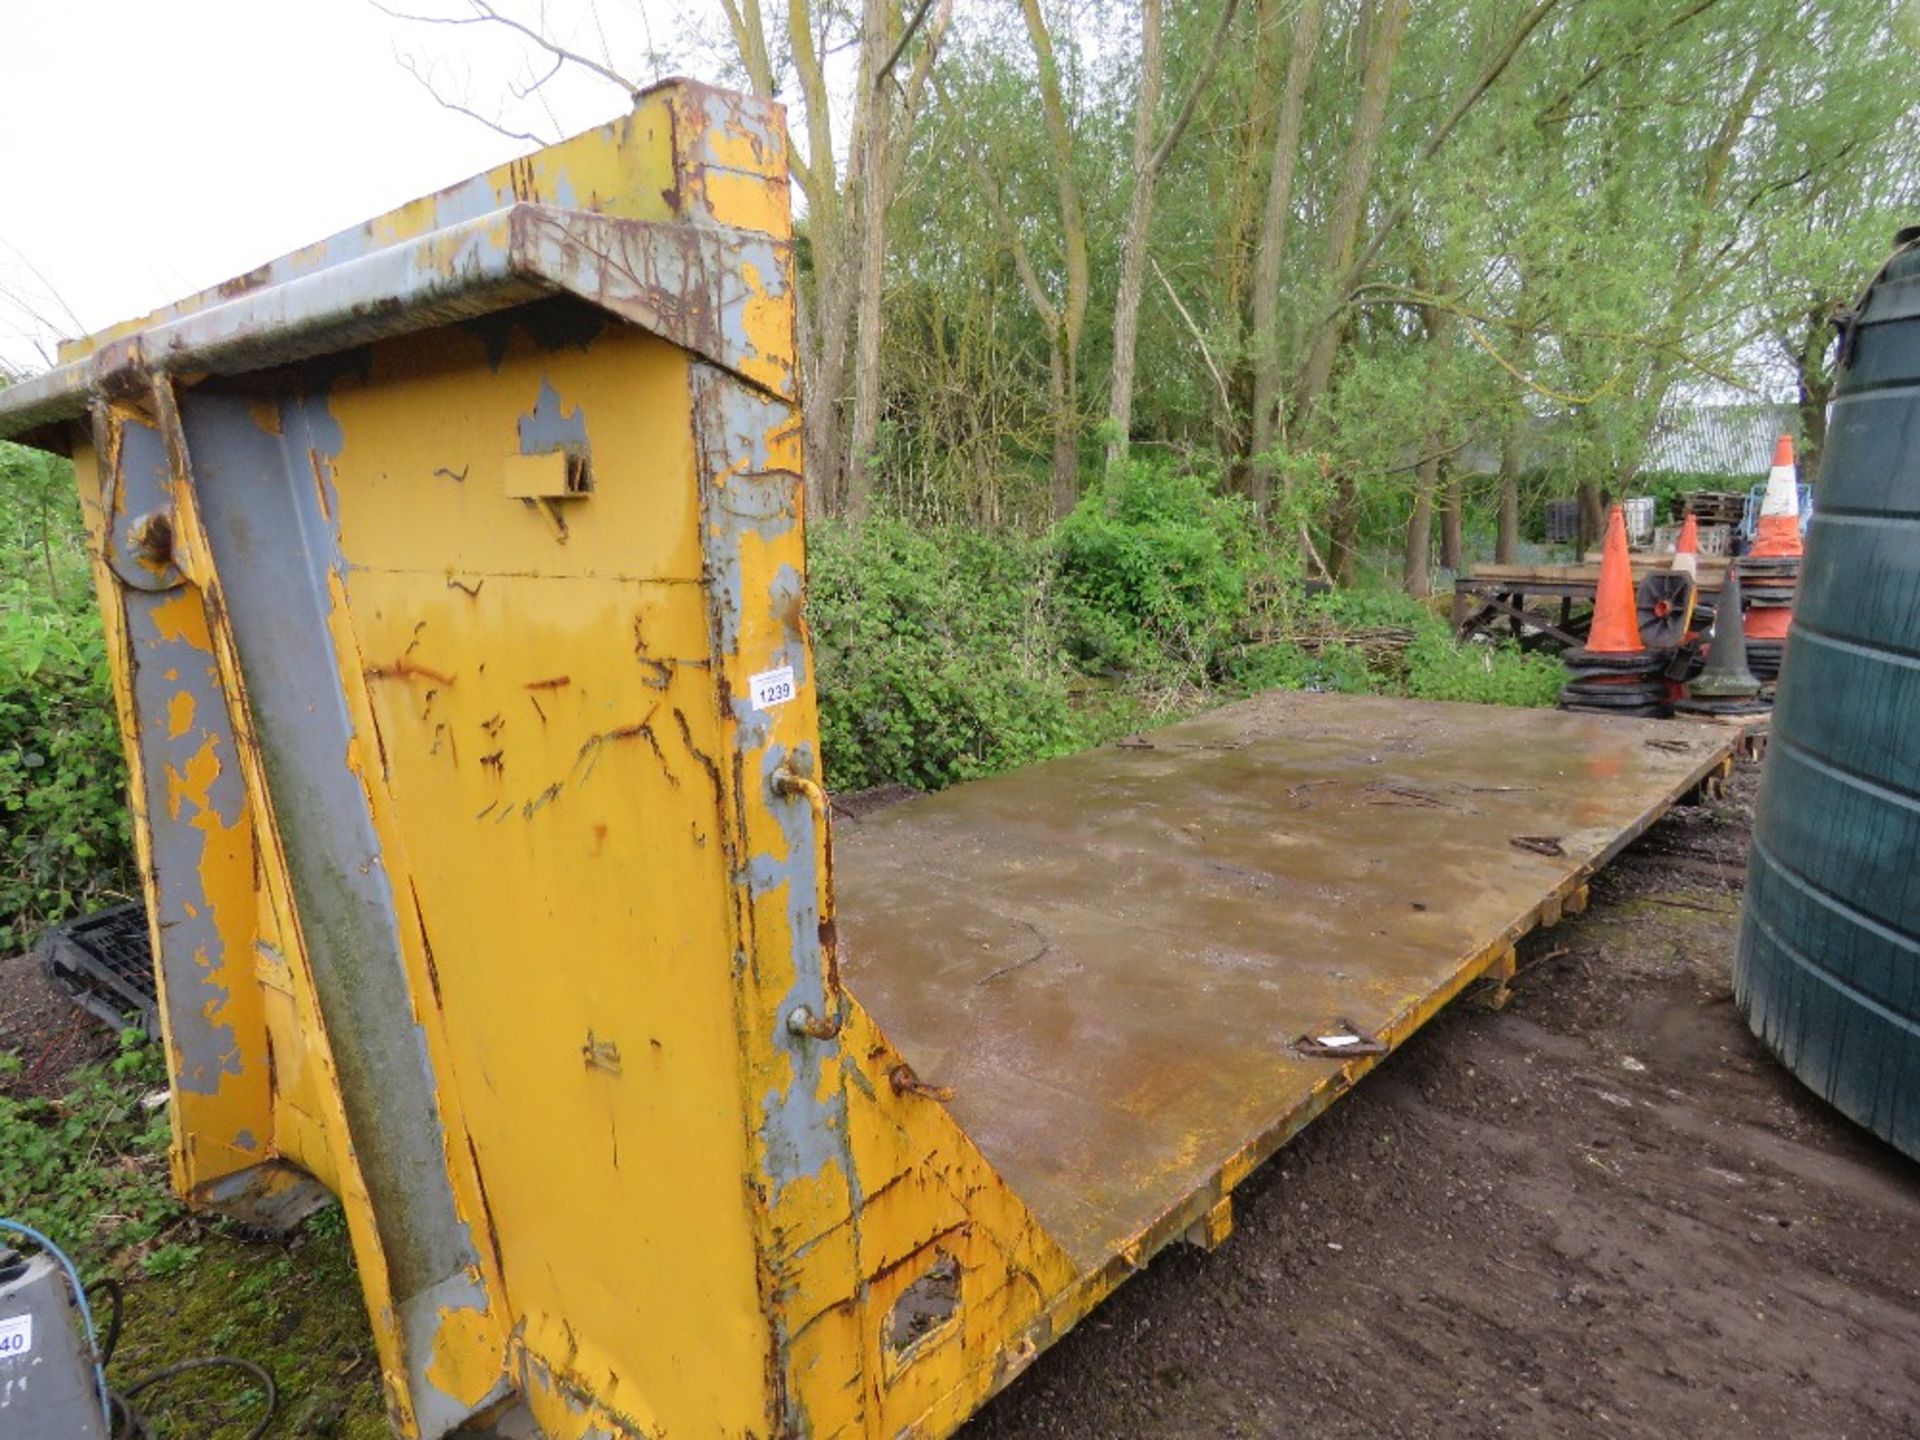 HOOK LOADER FLAT PLANT BODY 20FT LENGTH WITH HD TIE DOWN POINTS. DIRECT FROM LOCAL COMPANY.